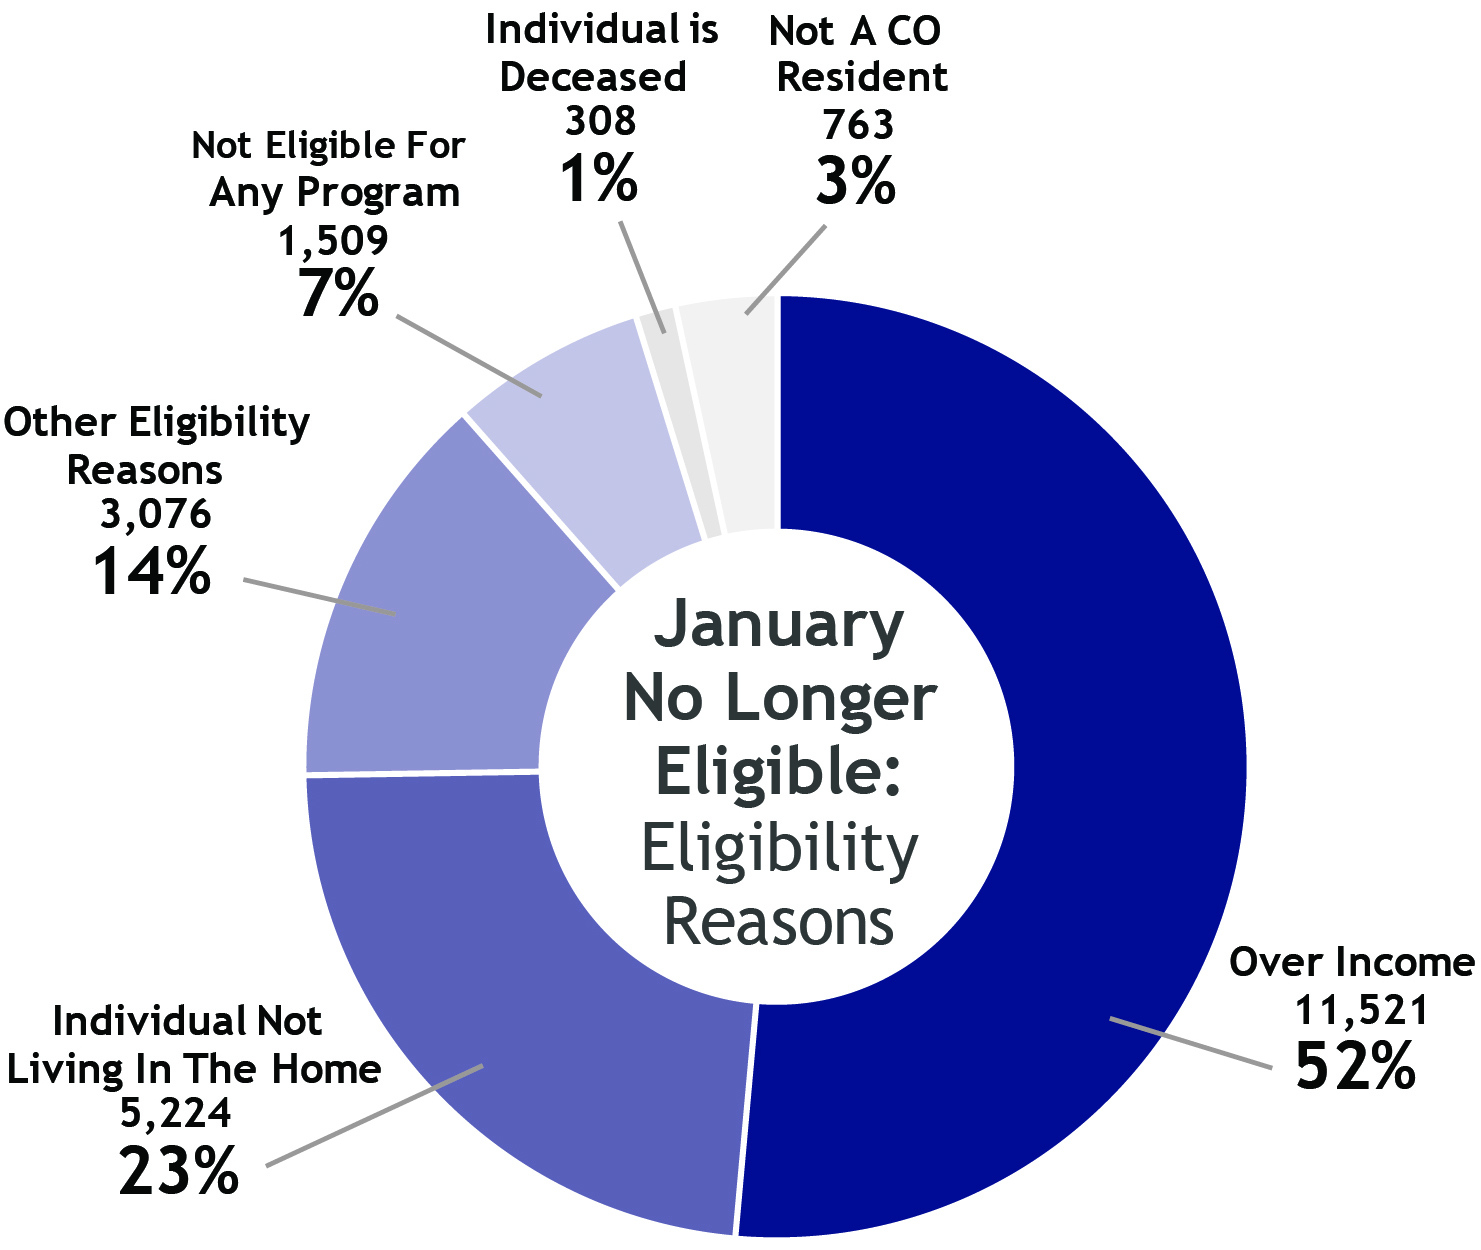 Donut chart showing detail of January Renewals section of No Longer Eligible for Eligibility Reasons with over income 11,521 the largest at 52%, Individual not living in the home 5,224 at 23%, other eligibility reasons 3,076 at 14%, not eligible for any program 1,509 at 7%, individual is deceased 308 at 1% and not a Colorado resident 763 at 3%.